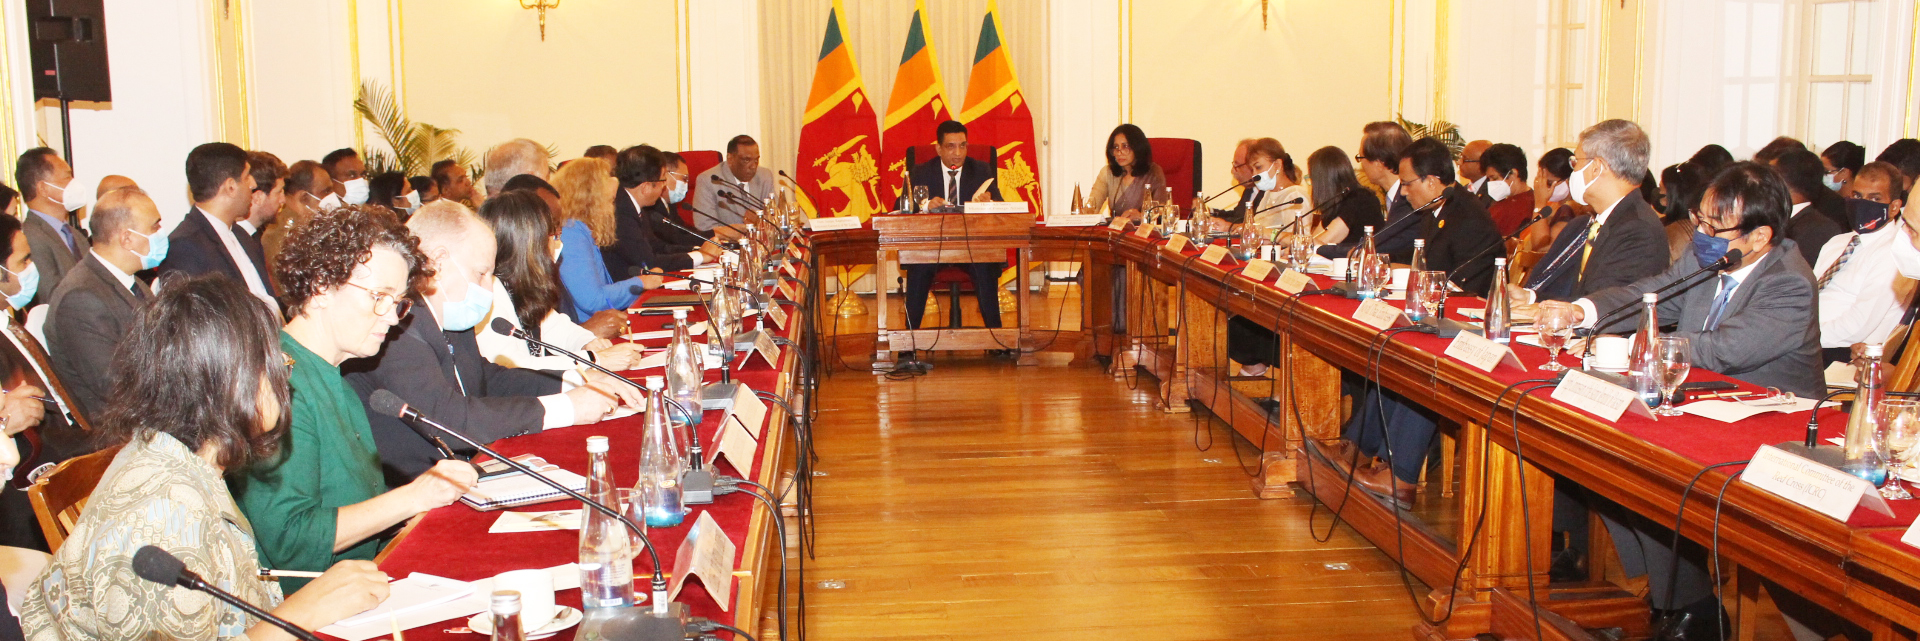 Foreign Minister briefs the Diplomatic Corps on current developments